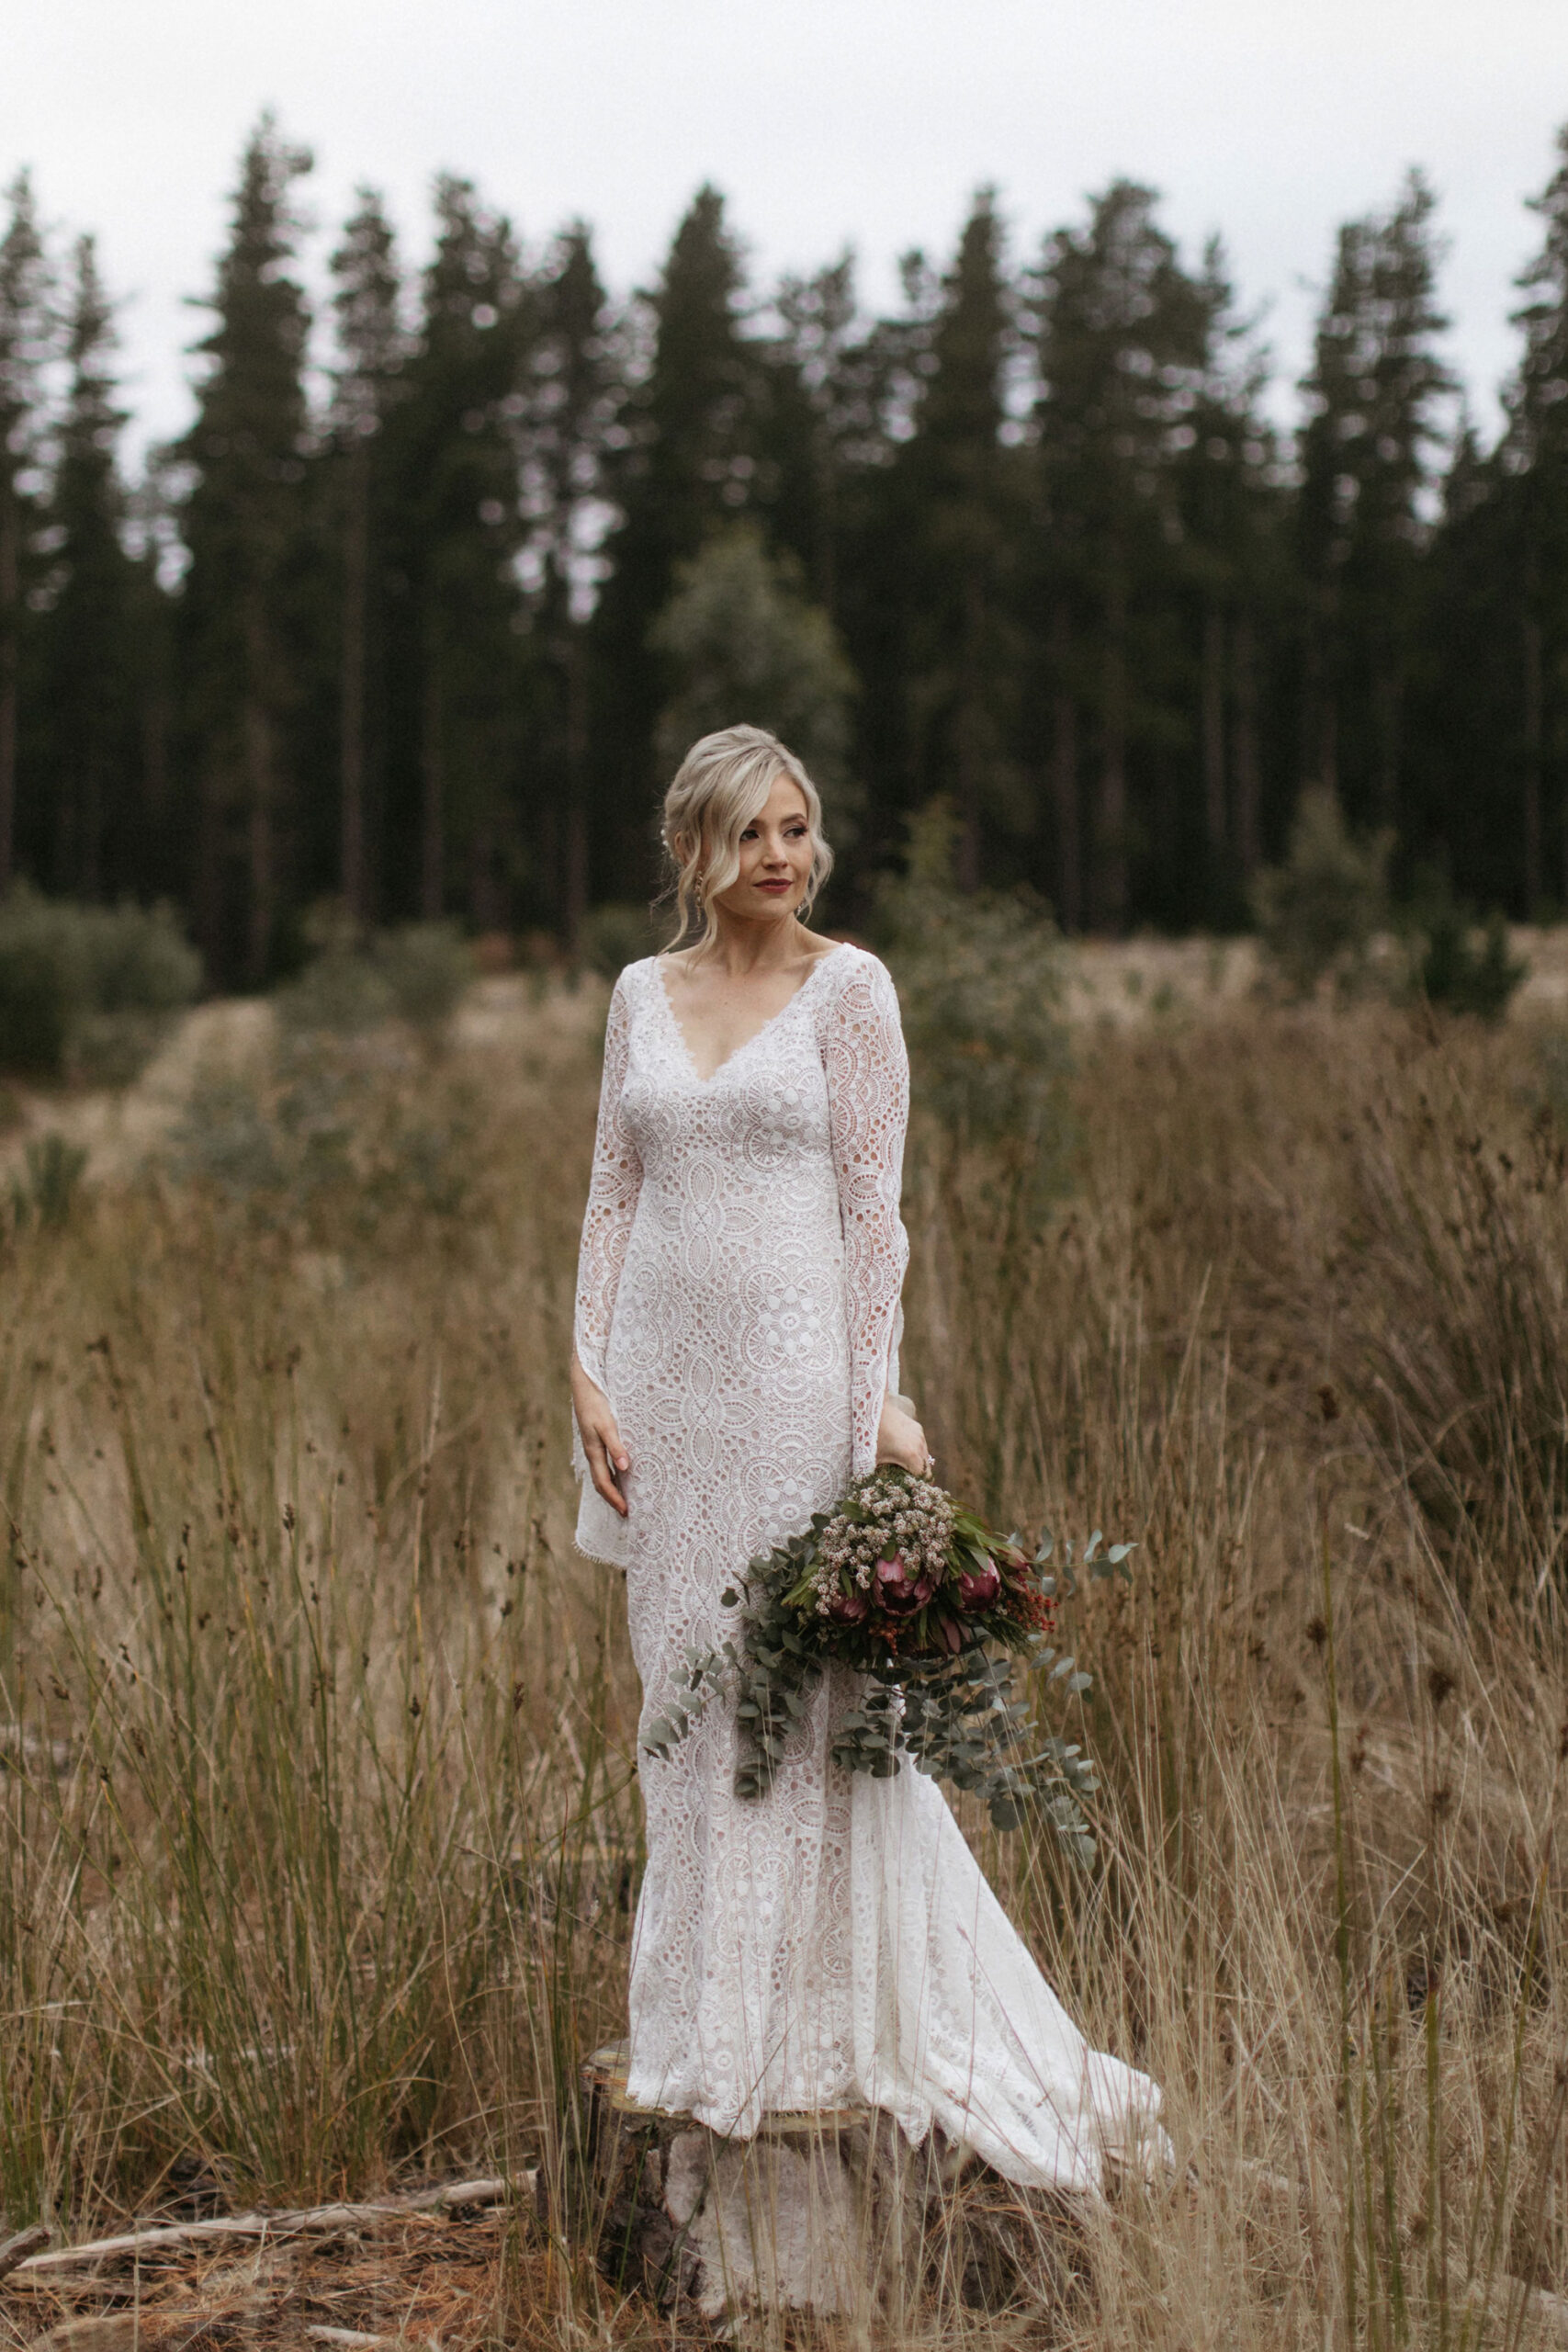 Bec Shaan Forest Country Wedding Dan Evans Photography 038 scaled